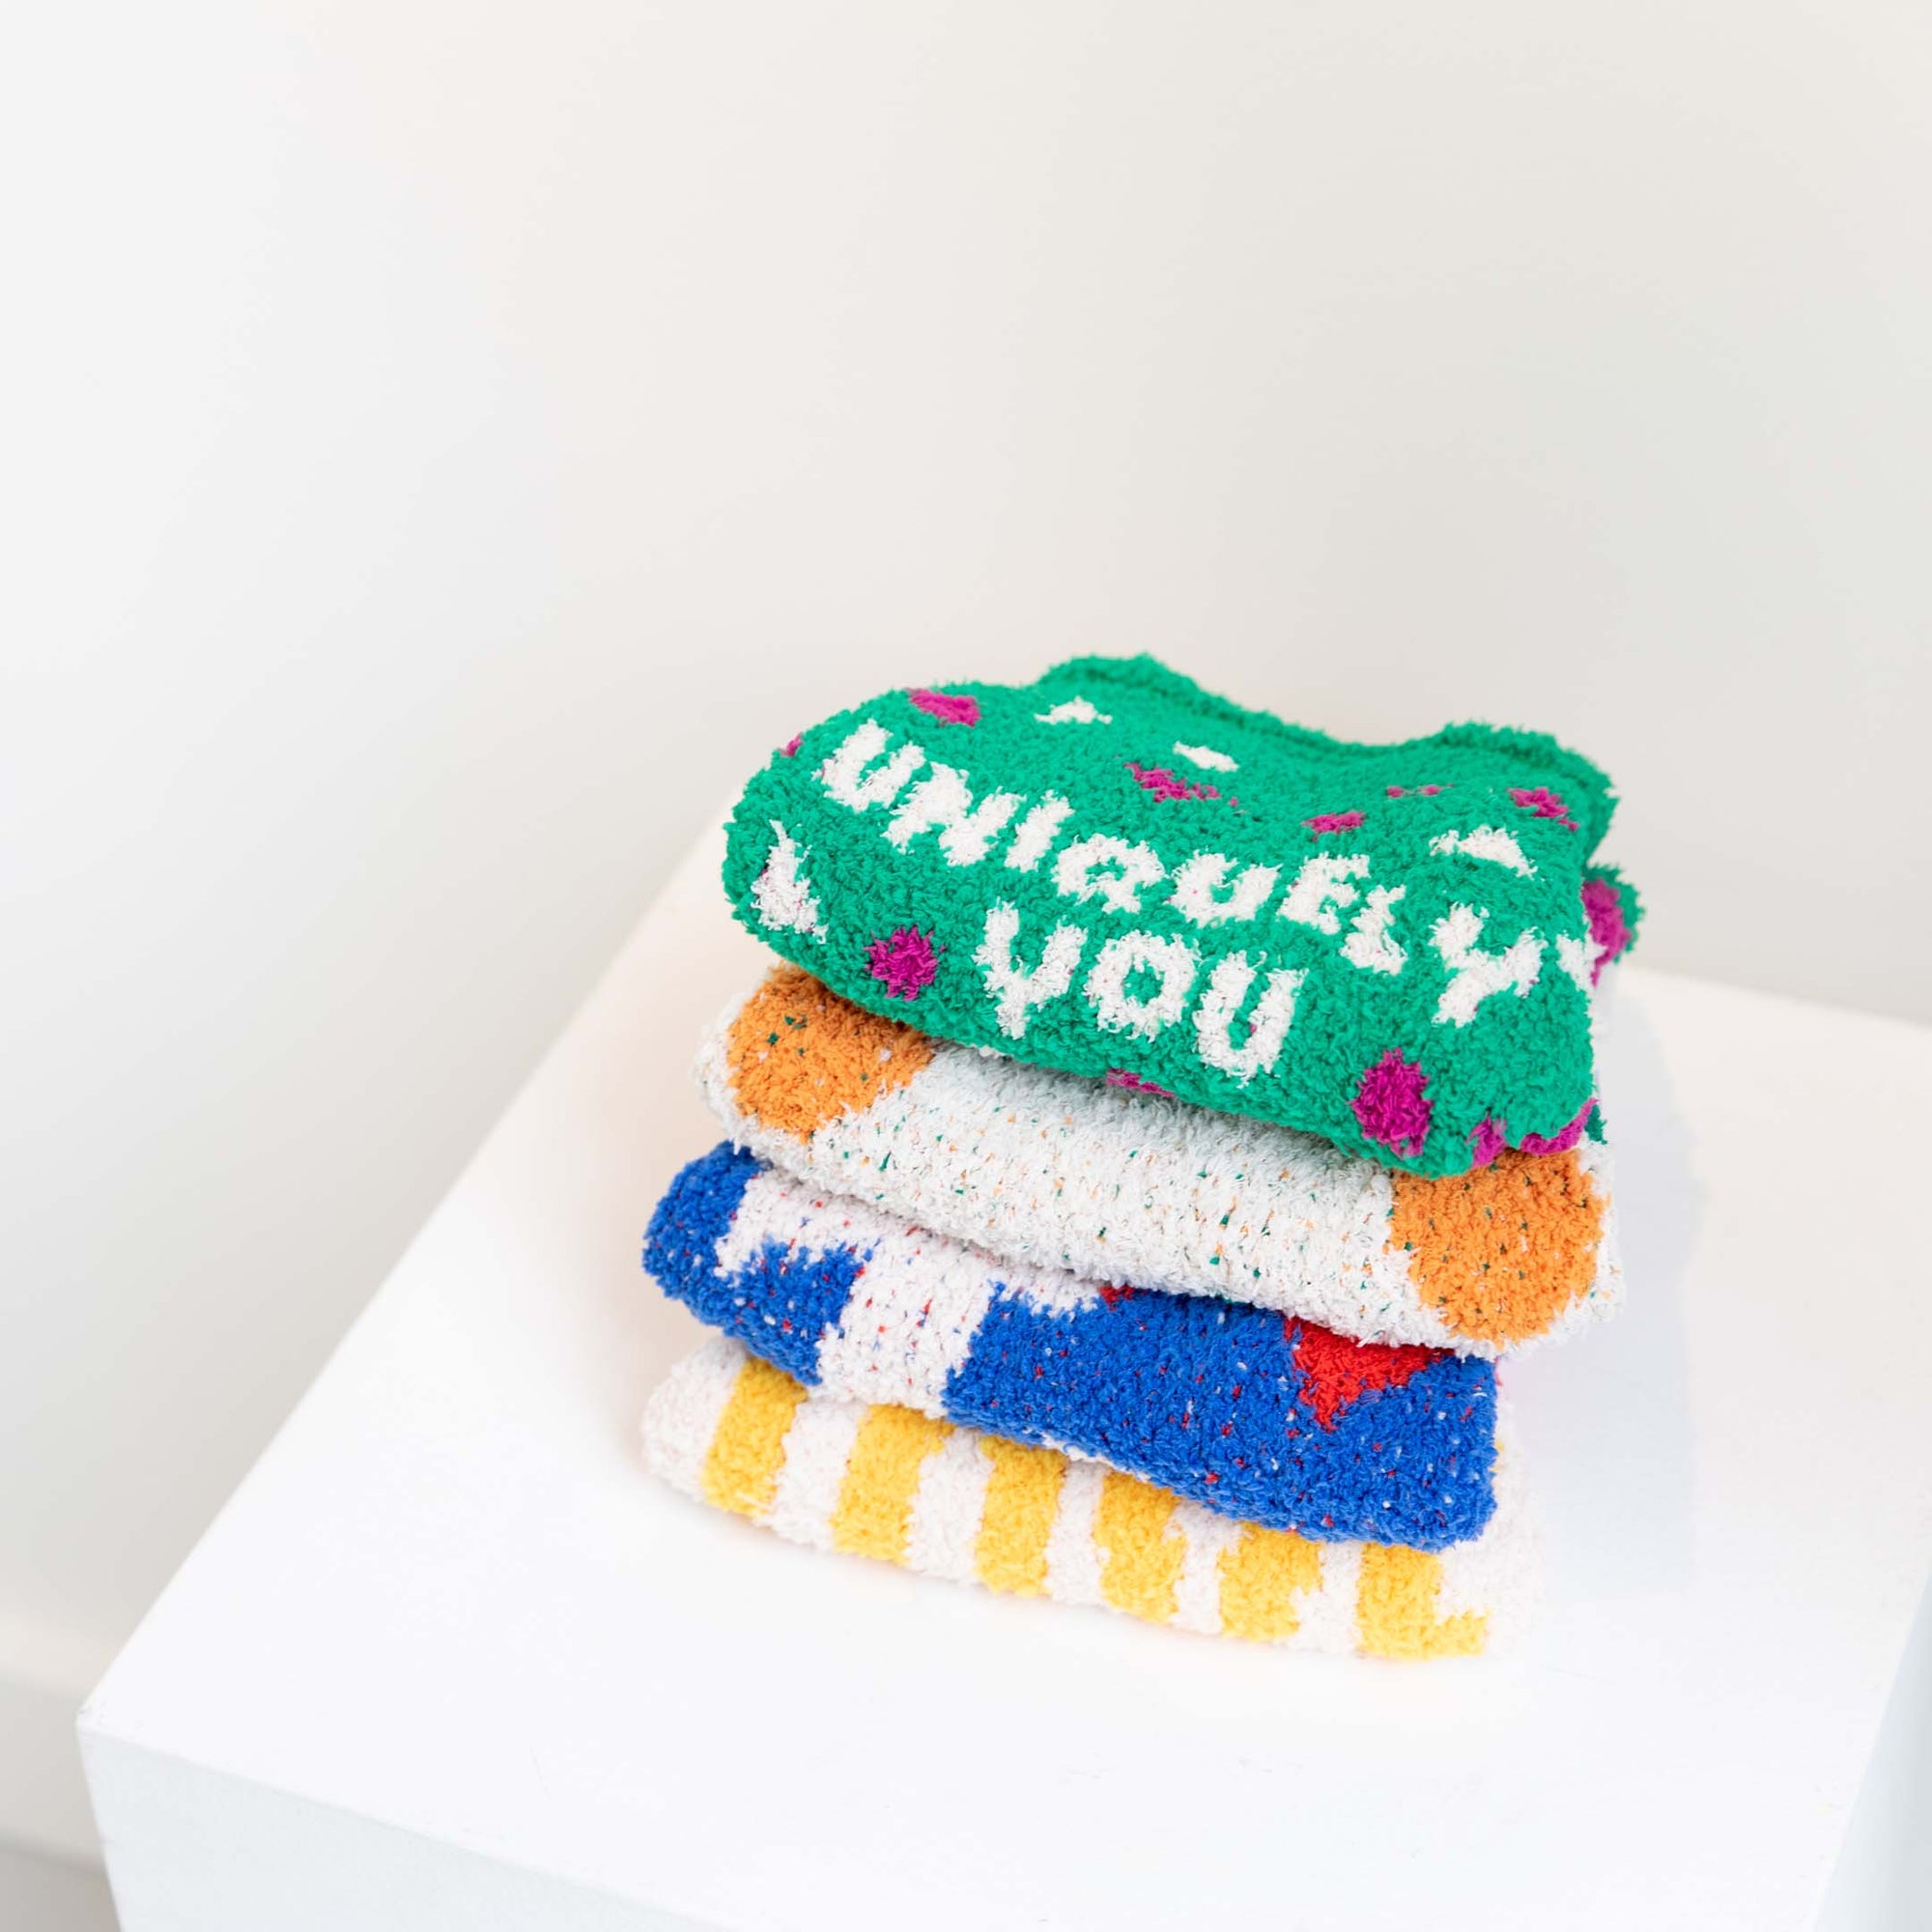 Stack of "The Furryfolks" sweaters with various designs, topped with a green "Uniquely You" sweater on a white cube.